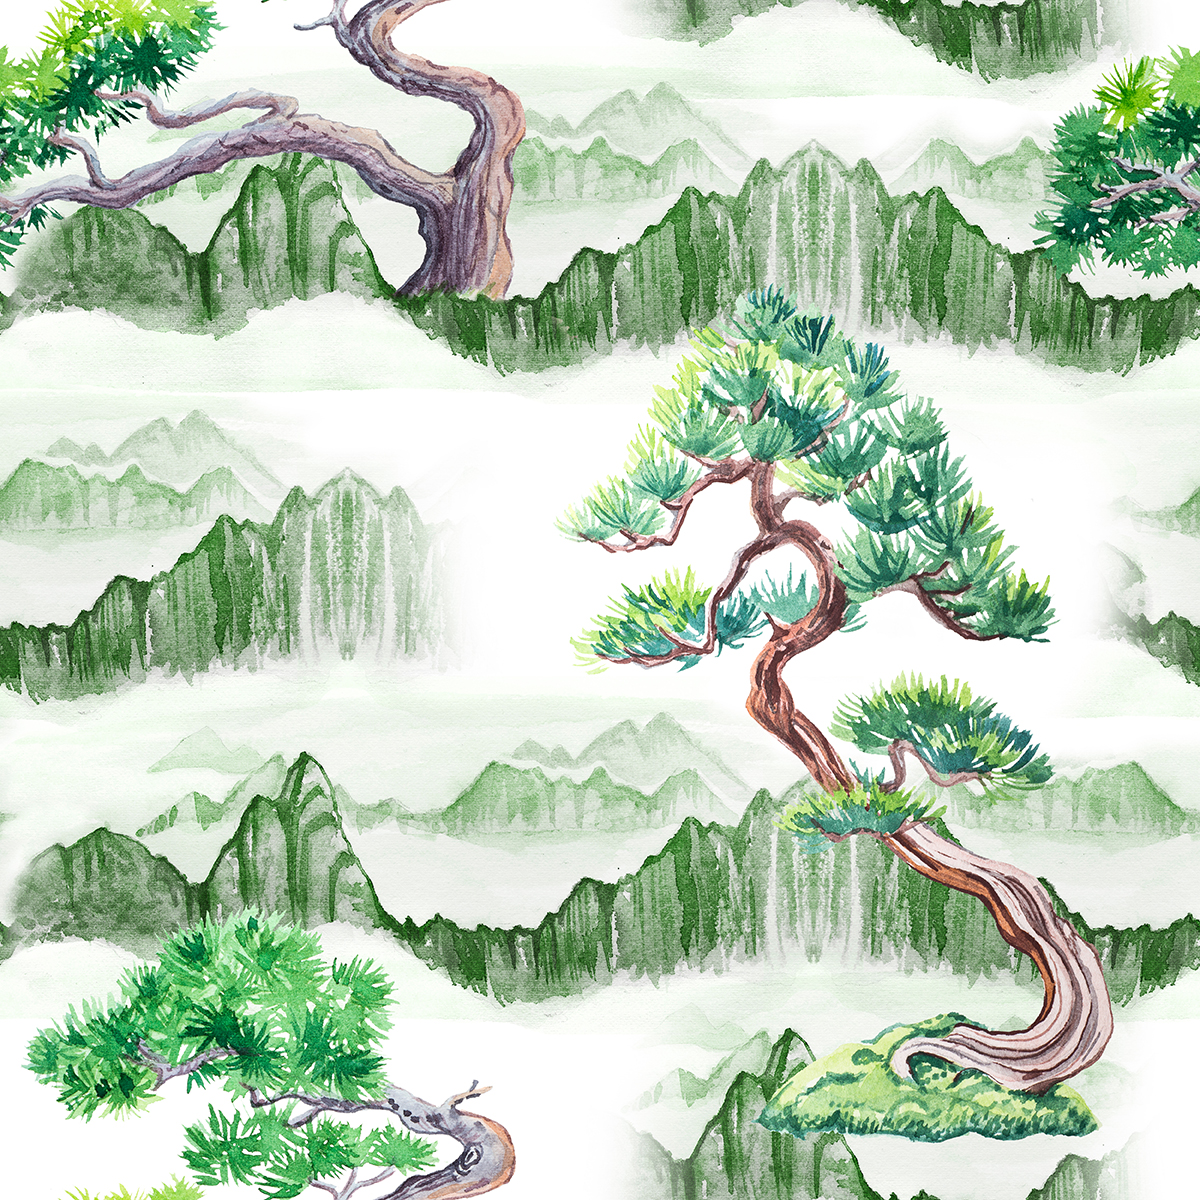 A watercolor painting of trees and mountains